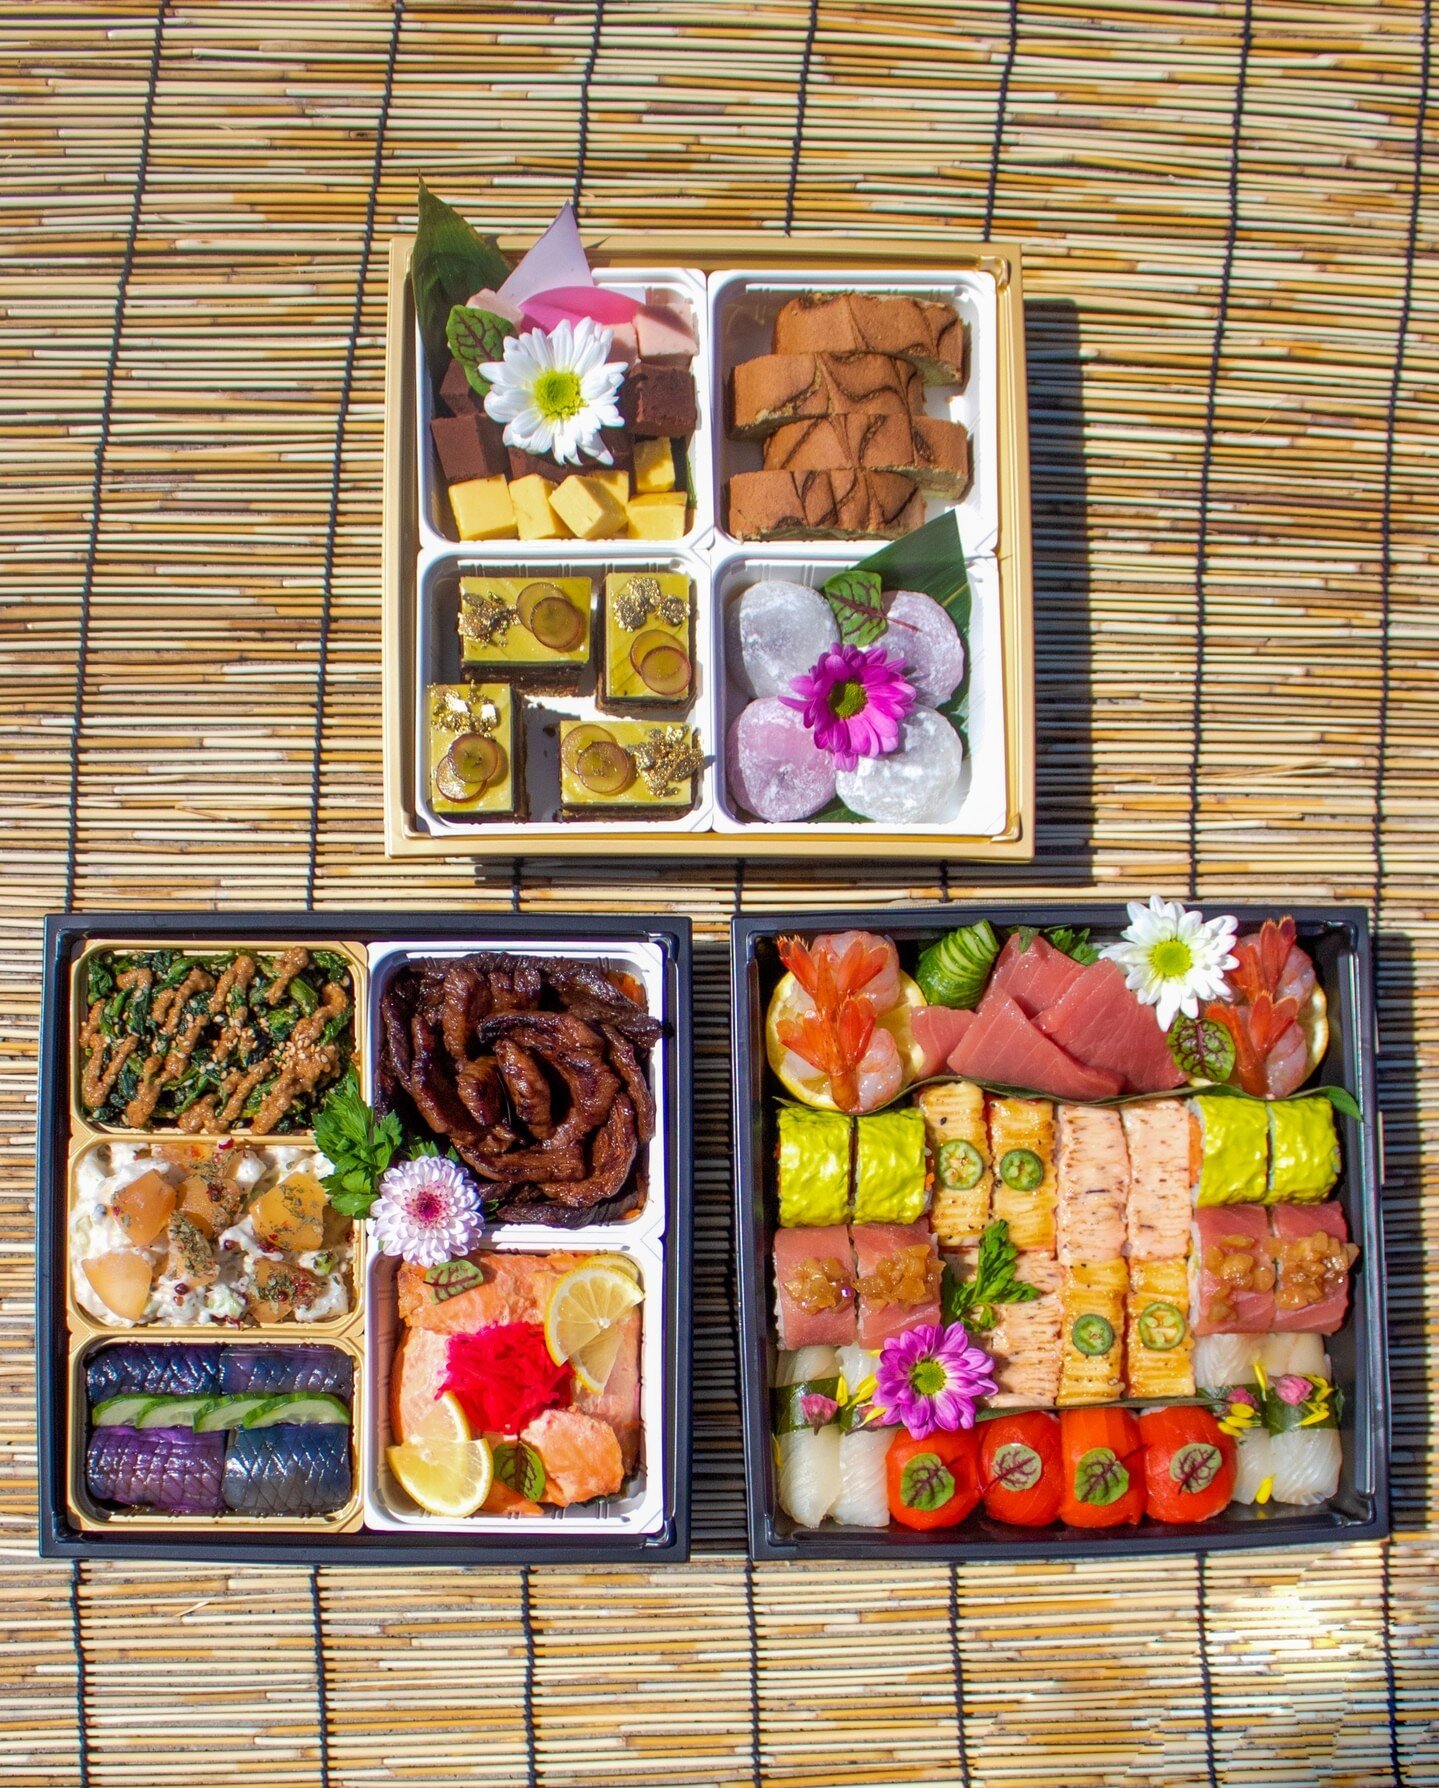 Surprise and delight Mom this Mother's Day with our exquisite 3-tiered Bento!

THE SUSHI TIER
Sashimi - Botan ebi (4pc), Chutoro (4pc) | Rolls - Red Wave Roll (4pc), Shojin Roll (4pc) | Signature Oshi Sushi - Salmon Oshi (4pc), Ebi Oshi (4pc) | Nigir